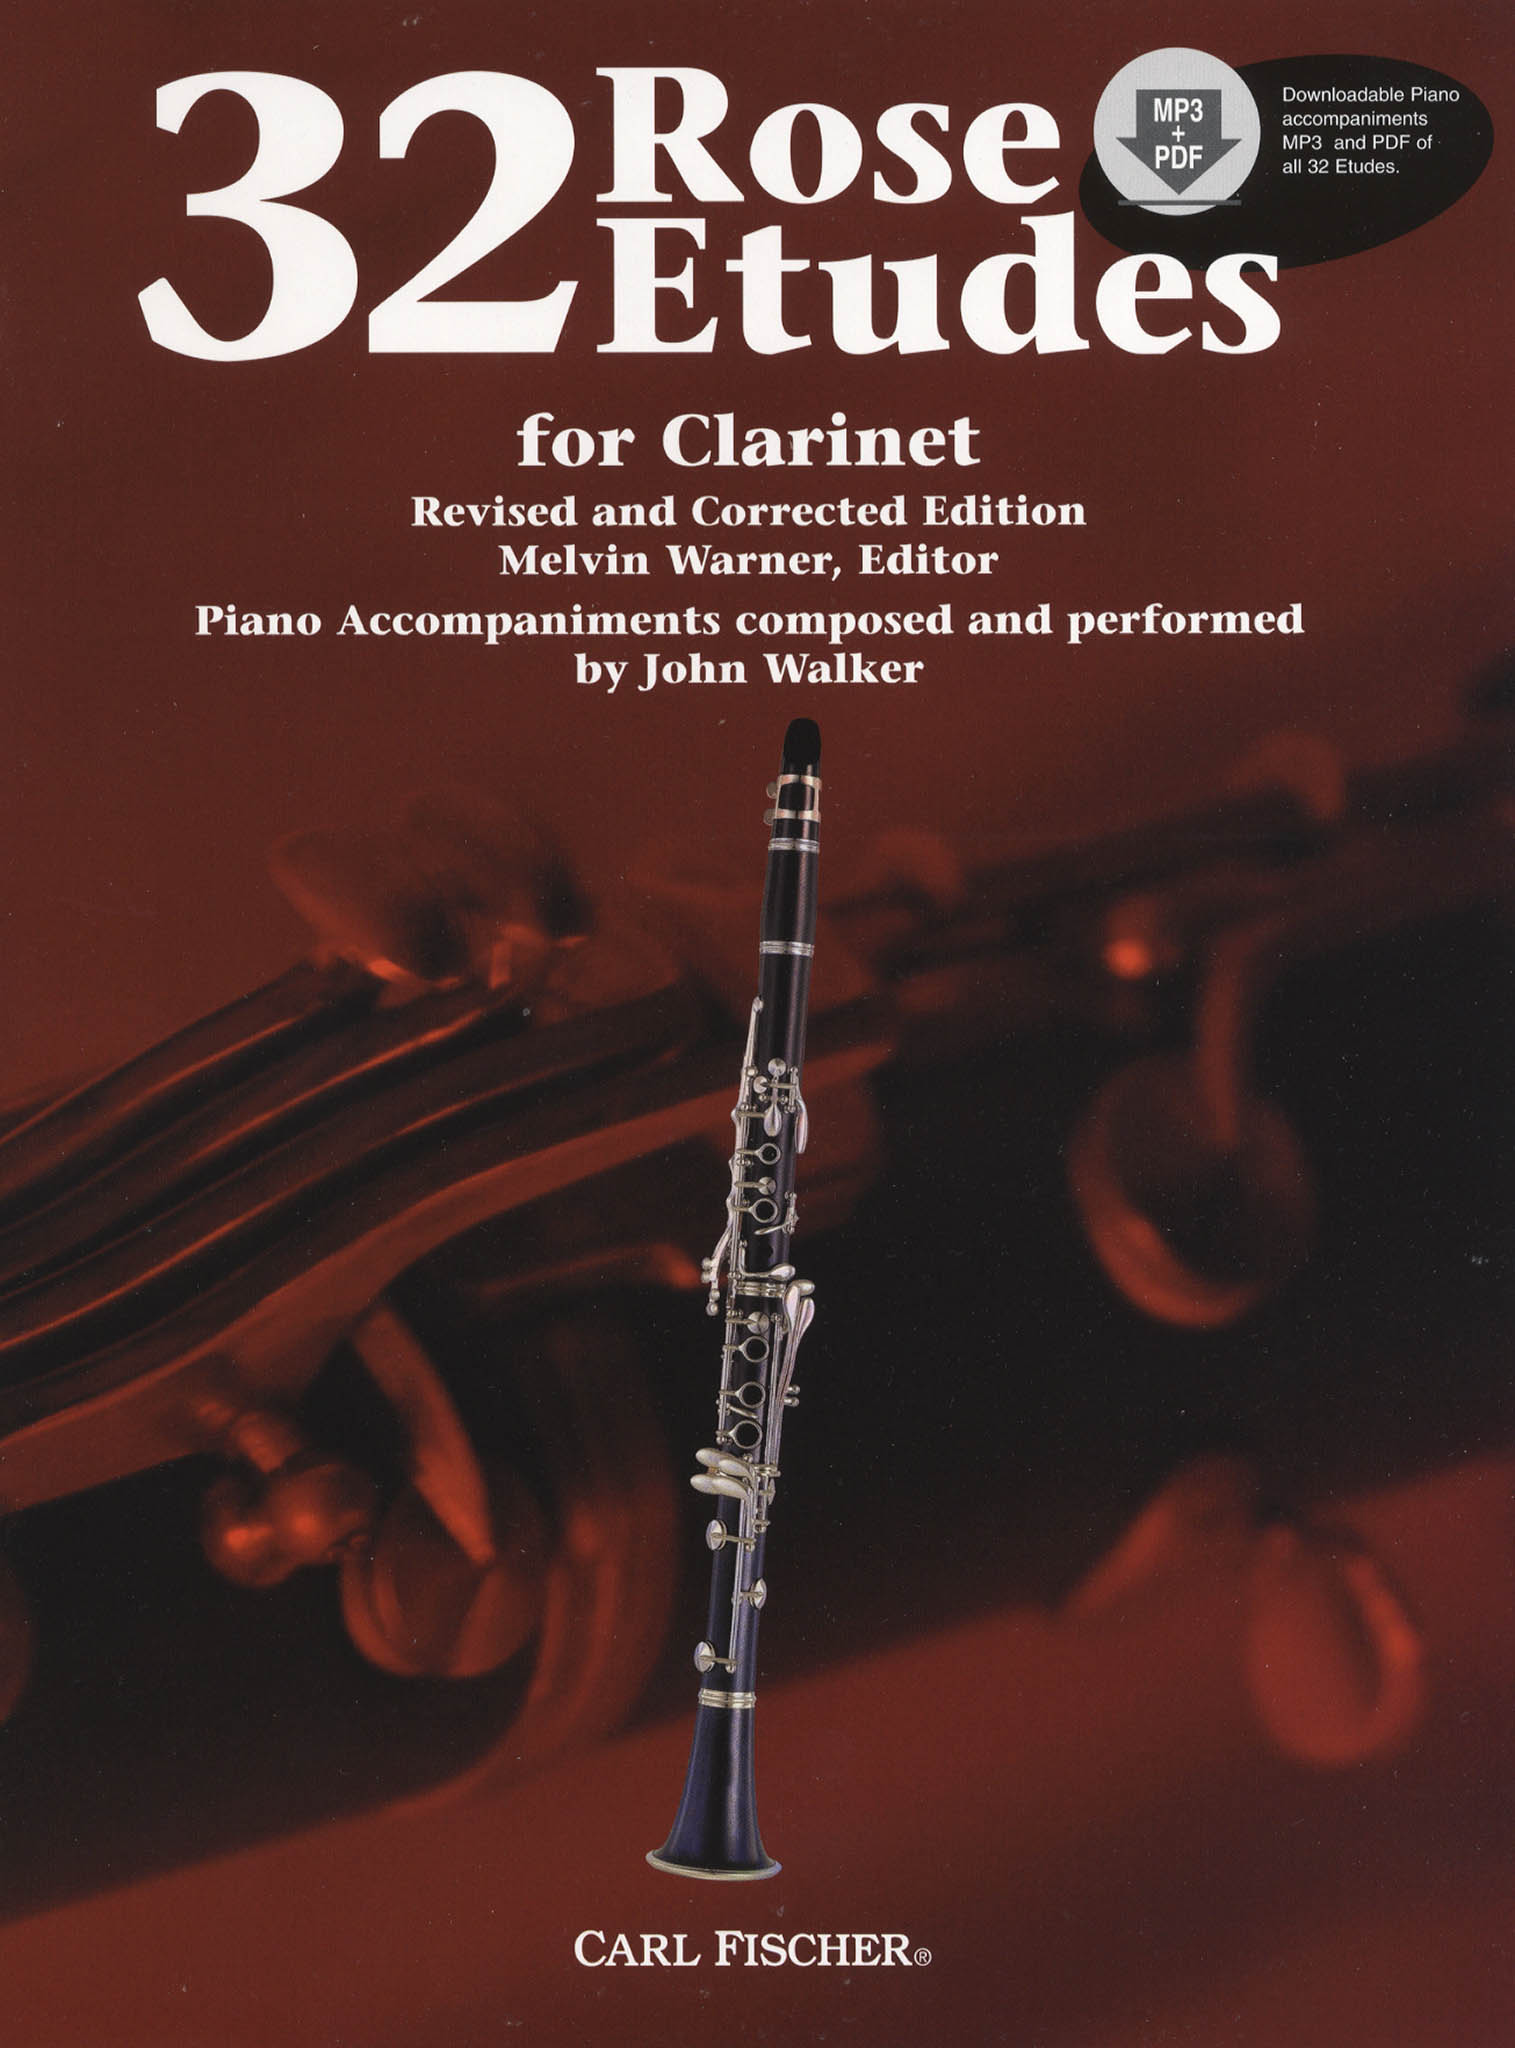 32 Etudes for Clarinet Cover